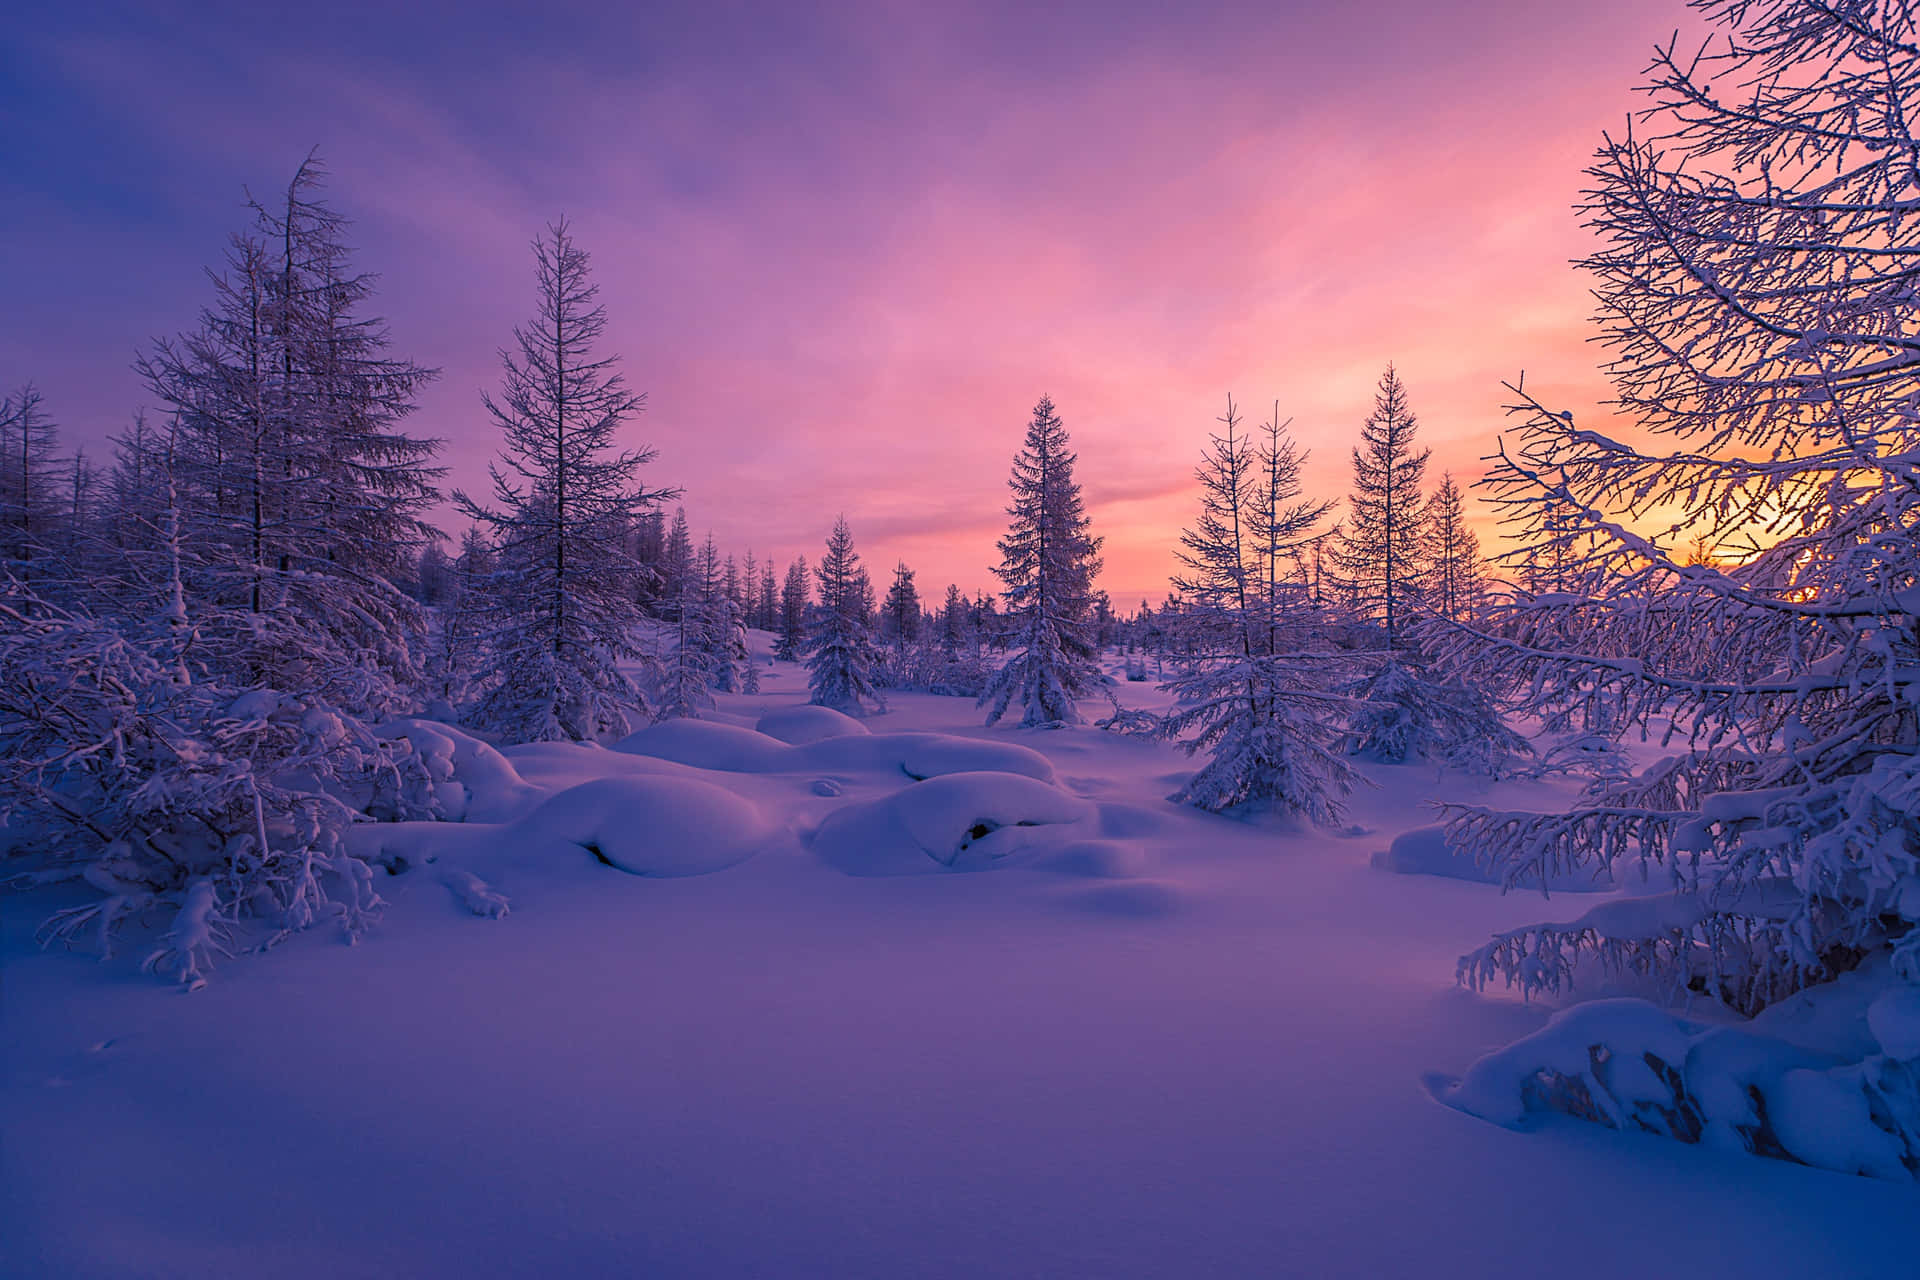 "A picturesque snowy forest in the winter"